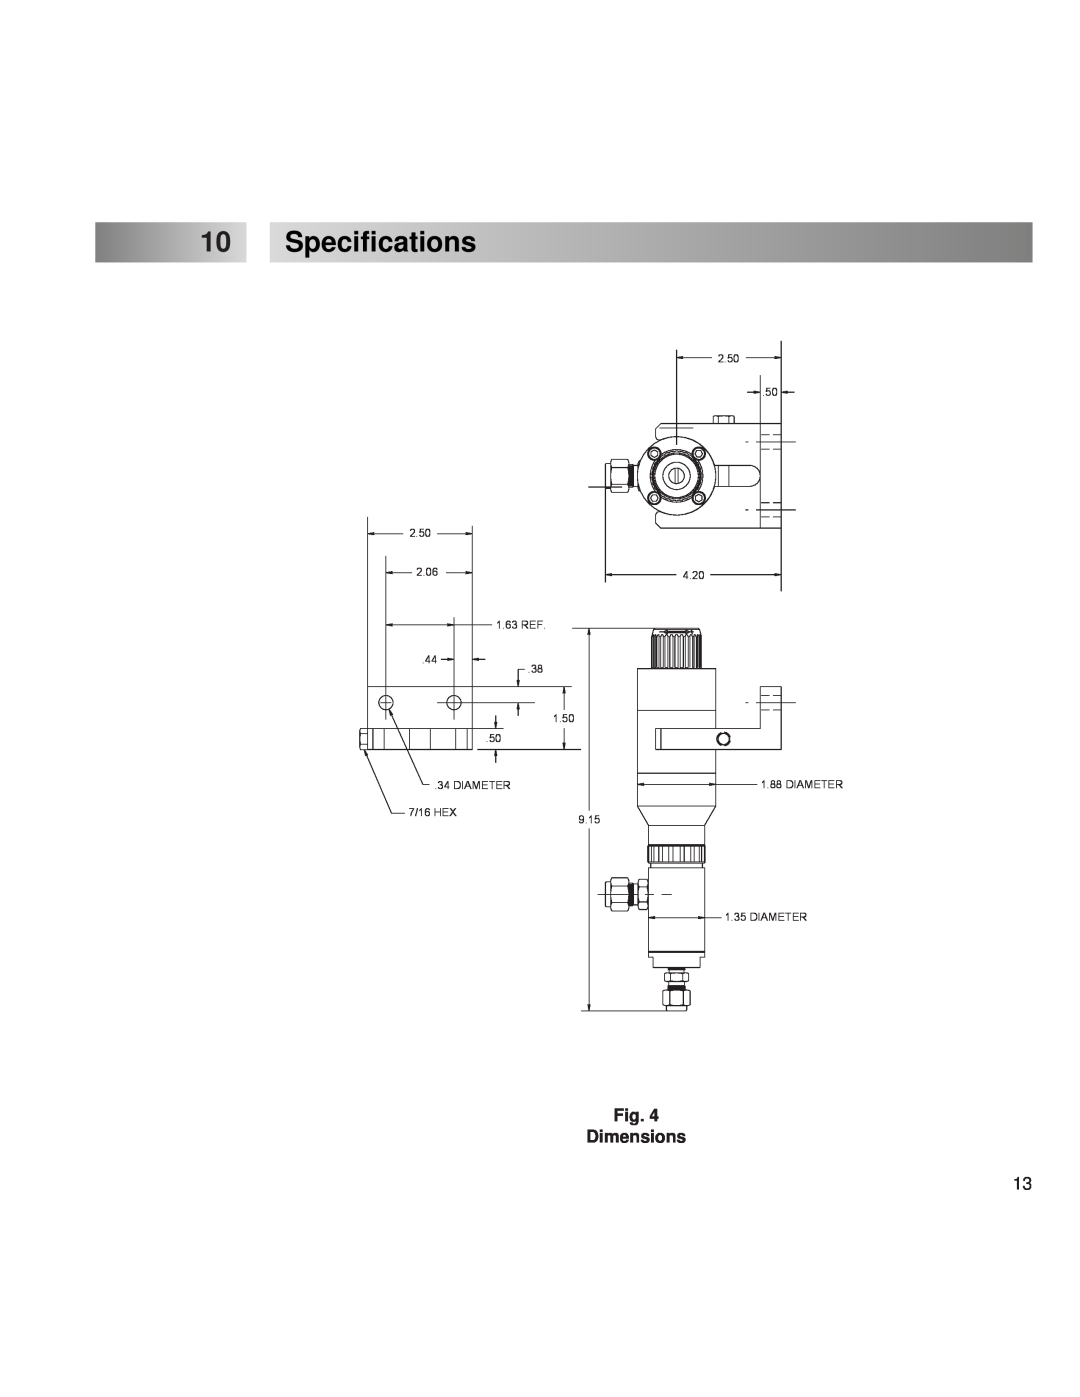 Henkel 9000 operation manual 10Specifications, Fig. Dimensions 